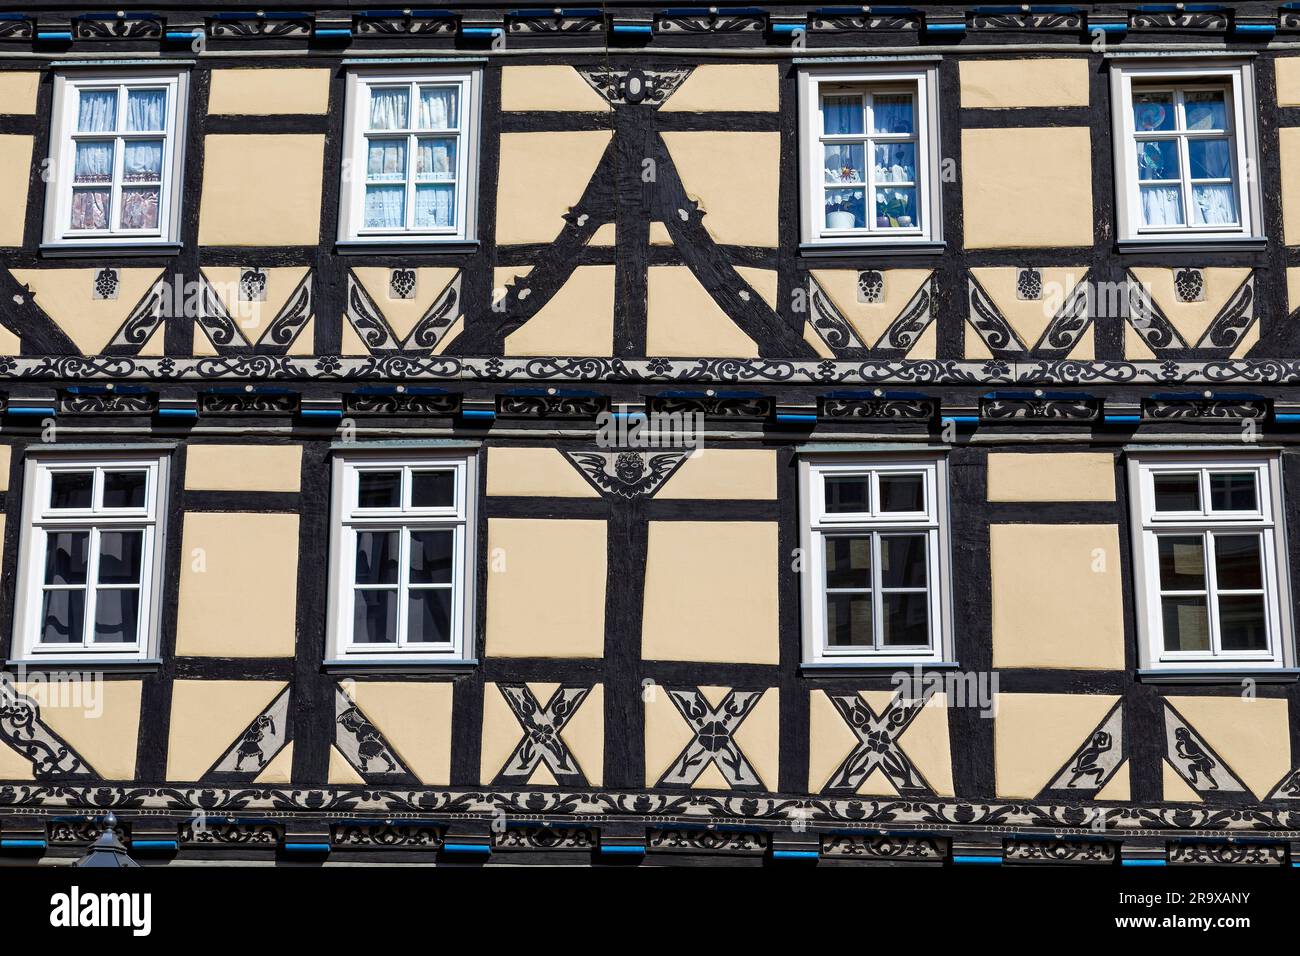 Details on magnificent half-timbered house with ornate wood carving, handicraft, facade richly decorated, Raiffeisen House, built 1679, Stad 44 Stock Photo